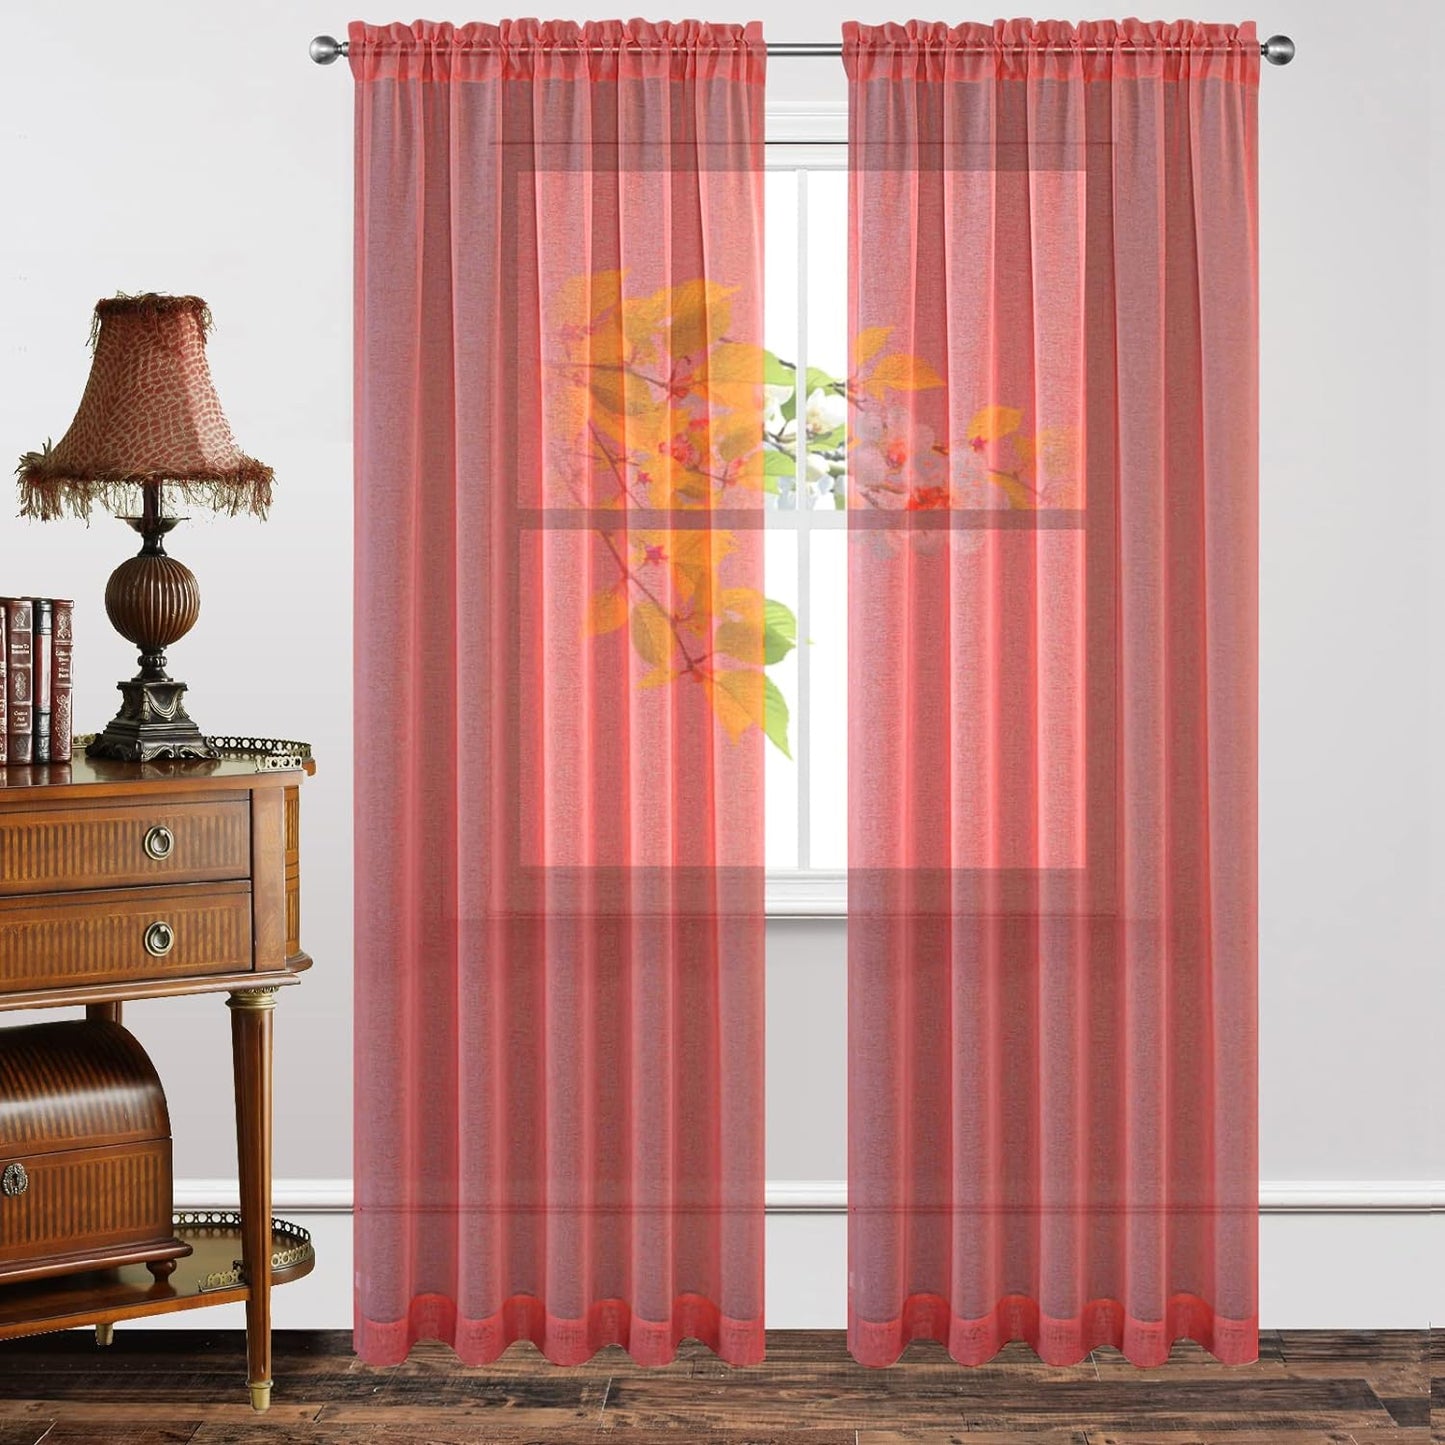 Joydeco White Sheer Curtains 63 Inch Length 2 Panels Set, Rod Pocket Long Sheer Curtains for Window Bedroom Living Room, Lightweight Semi Drape Panels for Yard Patio (54X63 Inch, off White)  Joydeco Red 54W X 84L Inch X 2 Panels 